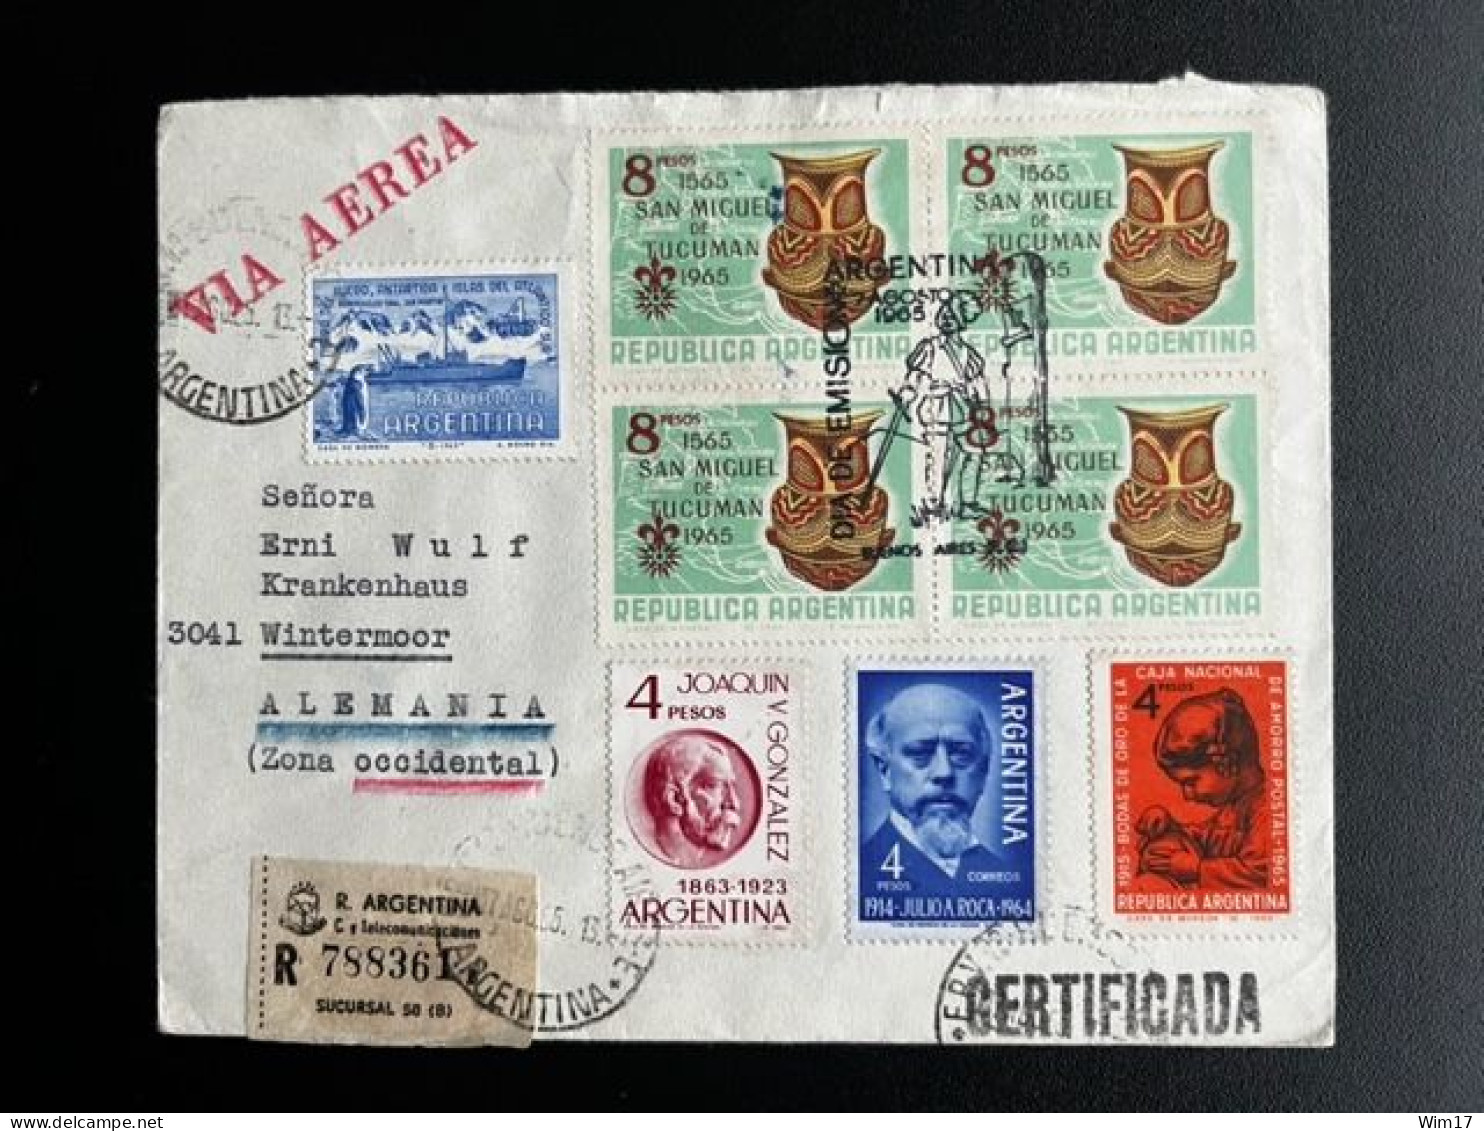 ARGENTINA 1965 REGISTERED AIR MAIL LETTER BUENOS AIRES TO WINTERMOOR 07-08-1965 CERTIFICADO - Covers & Documents